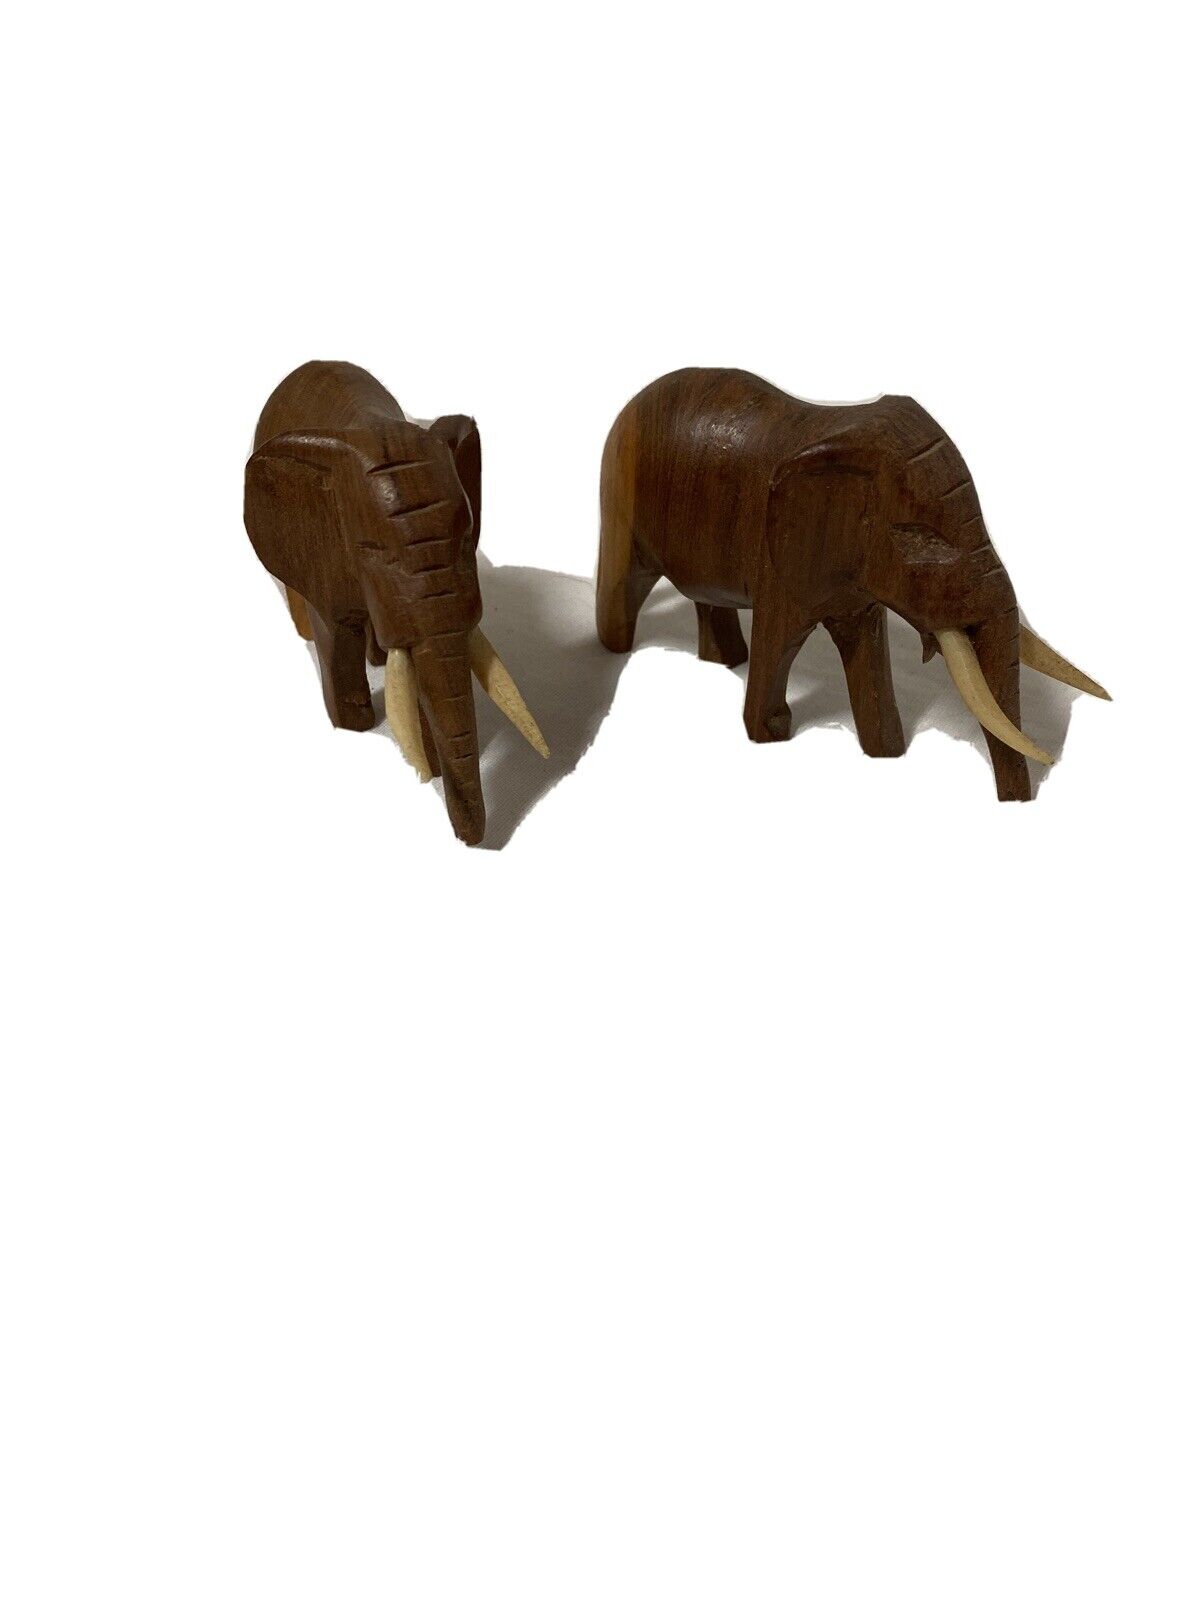 2 Small Vintage Decorative Hand Carved Dark Wooden Elephant Figurines